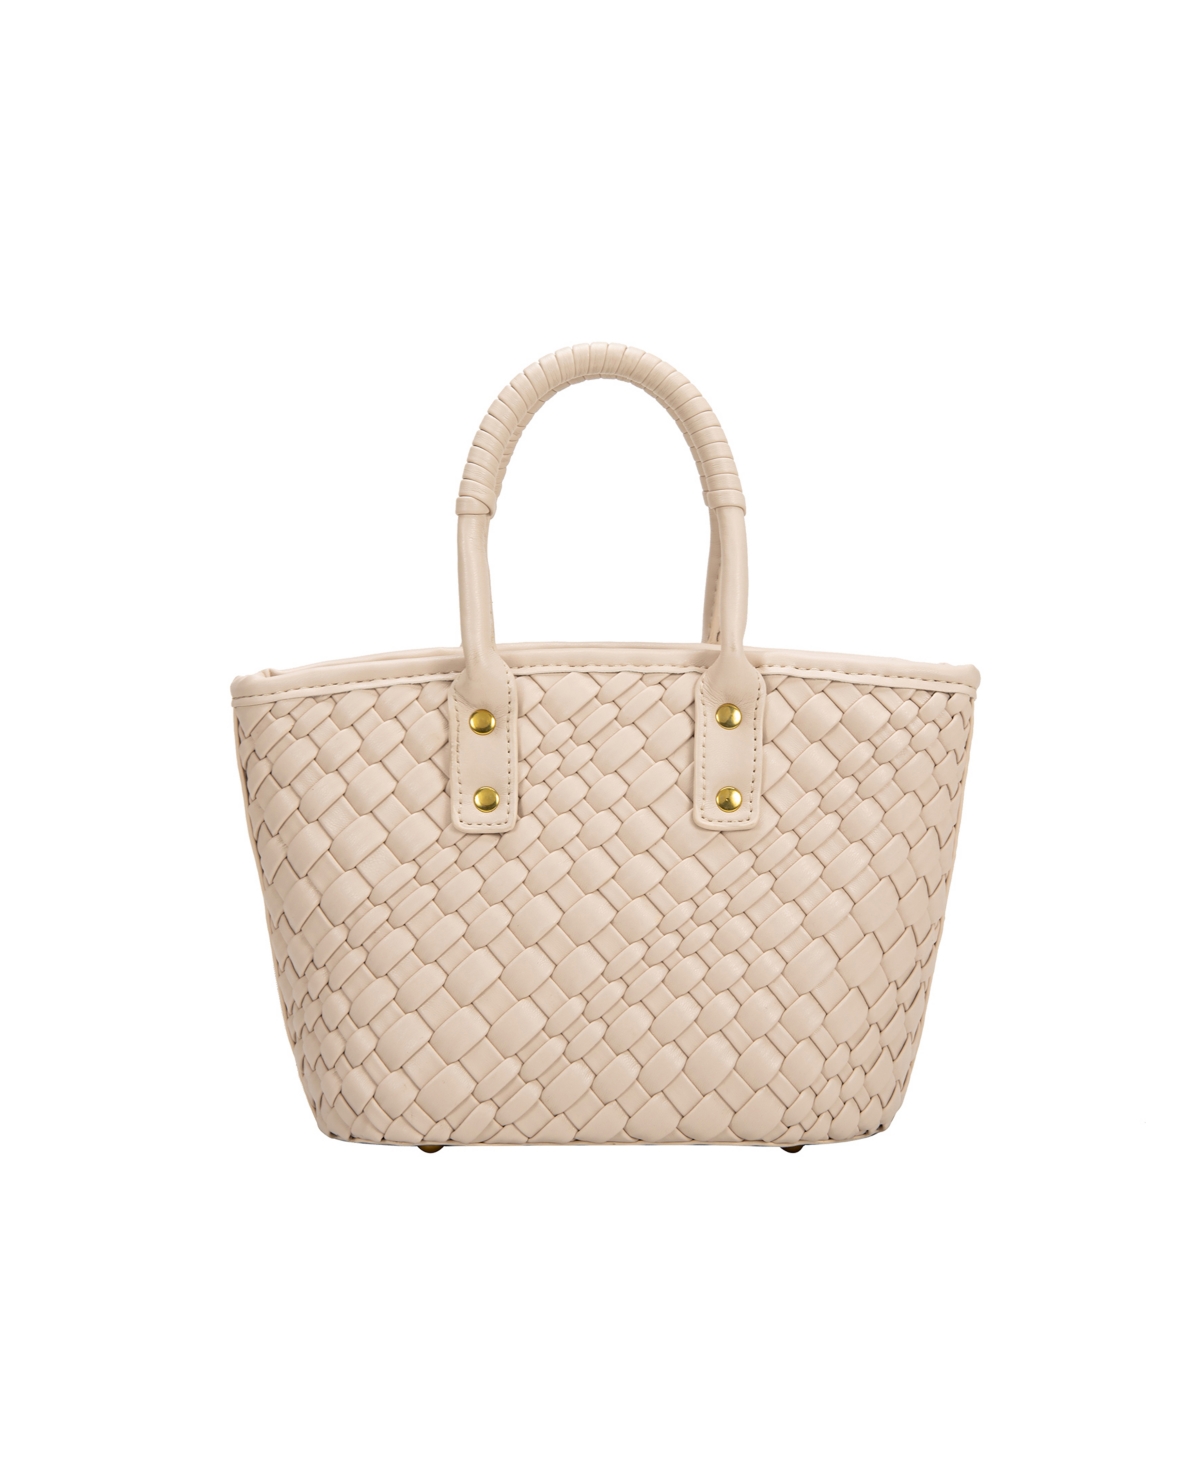 Melie Bianco Maddy Small Faux Leather Crossbody Bag In Bone